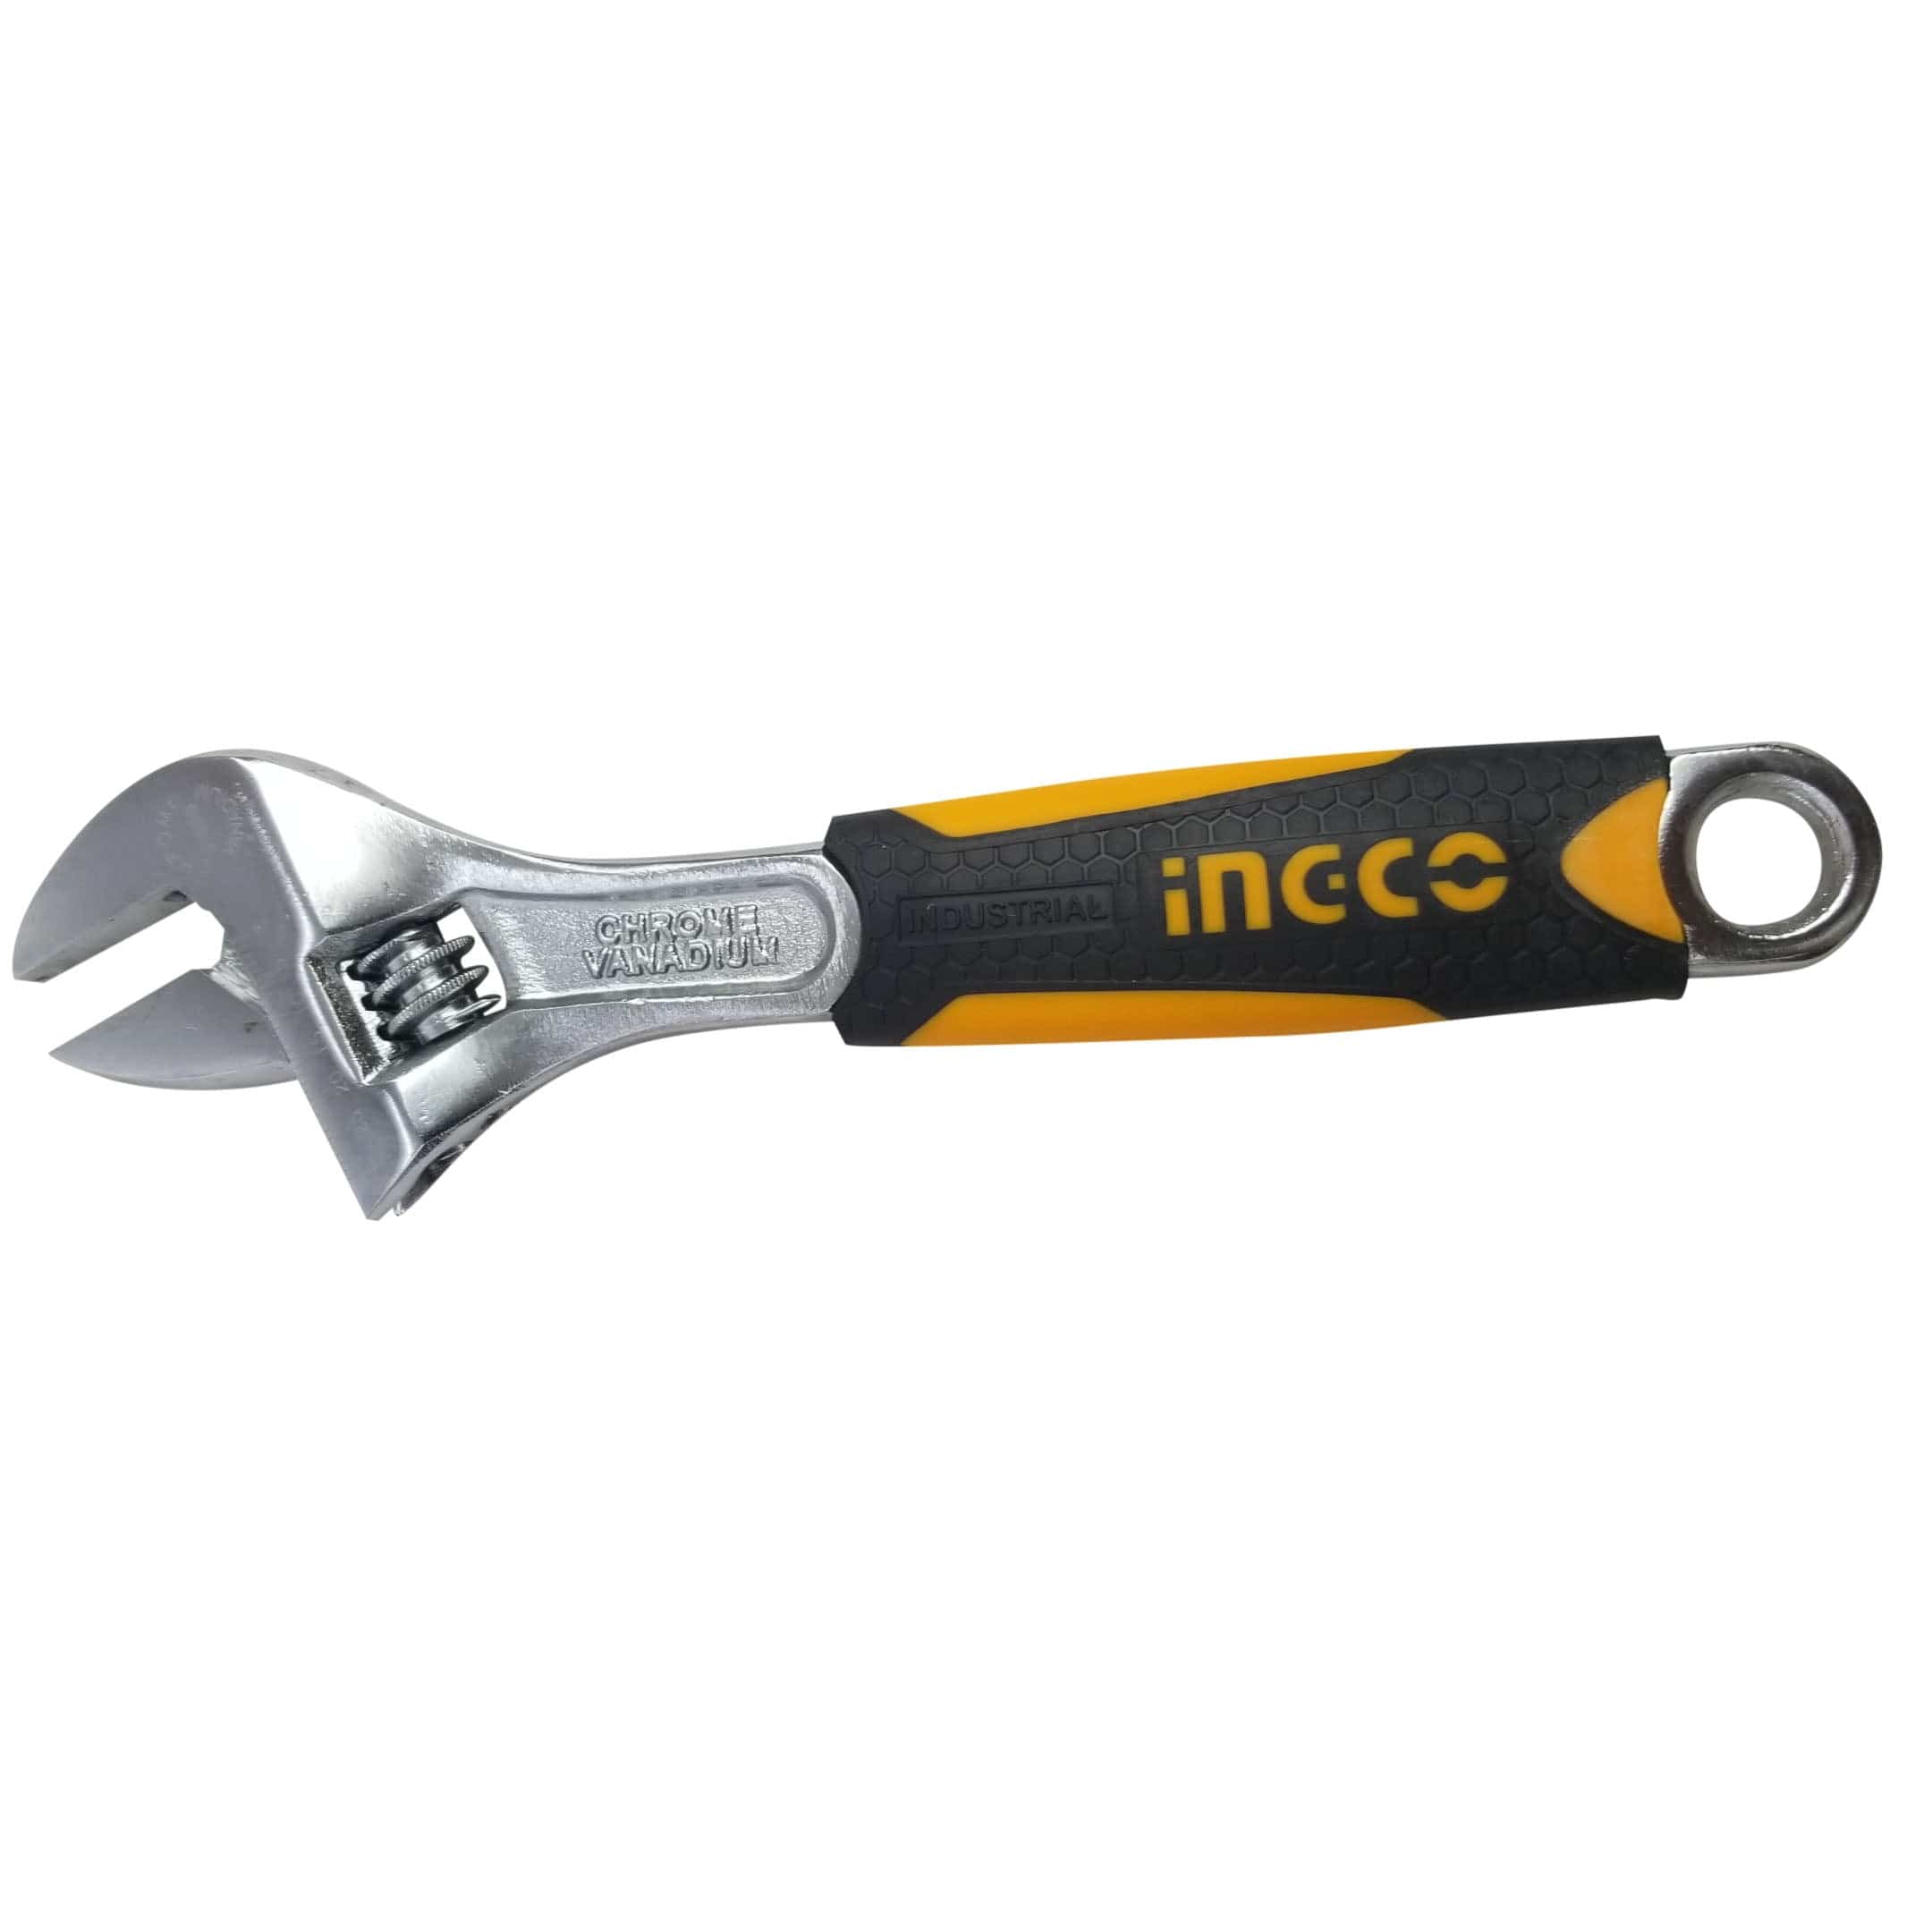 Ingco Soft Handle Adjustable Wrench 8", 10" & 12" - HADW131088, HADW131108 & HADW131128 | Supply Master | Accra, Ghana Wrenches Buy Tools hardware Building materials